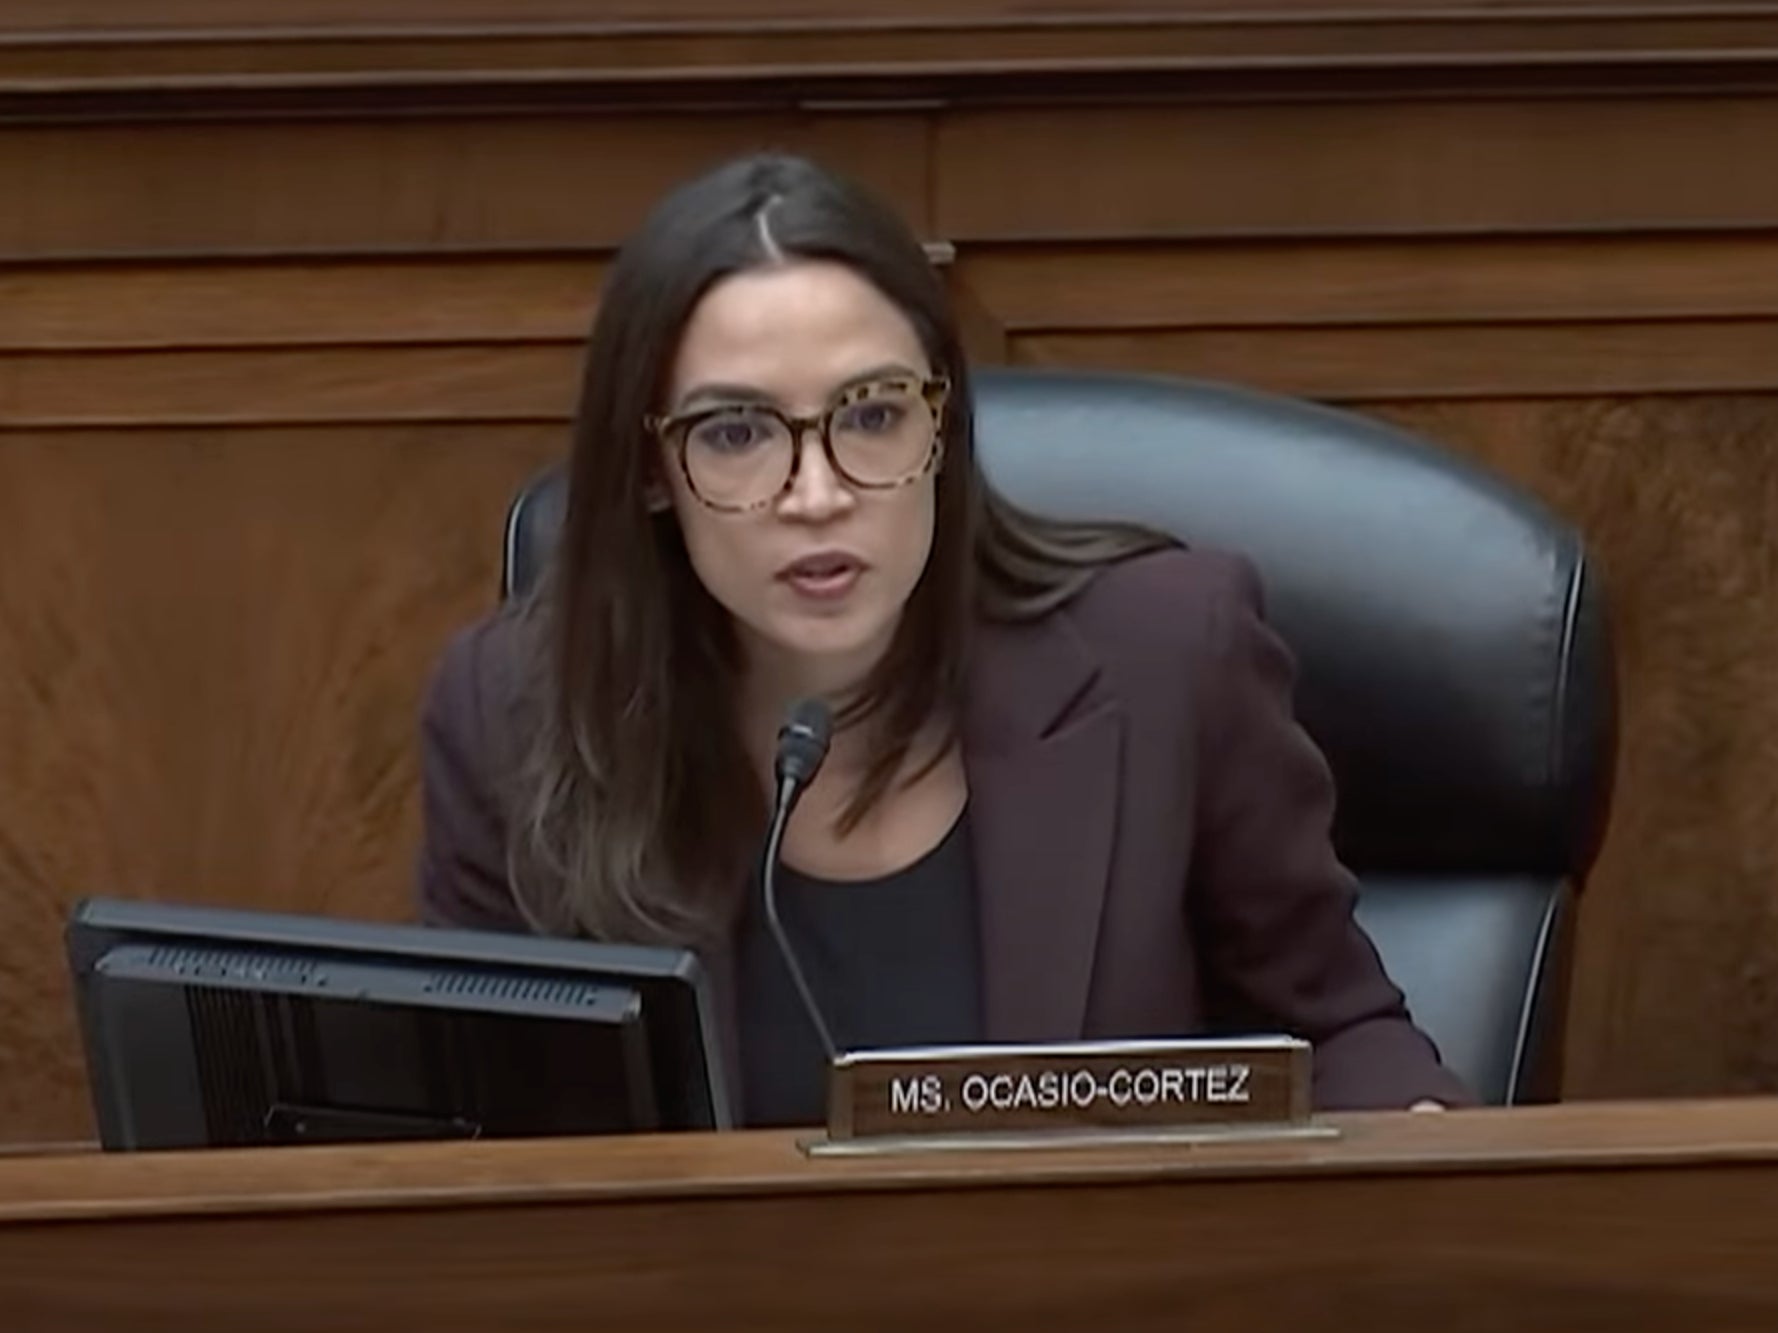 File: New York Representative Alexandria Ocasio-Cortez hit out at fellow lawmaker for bizarre anime video depicting her